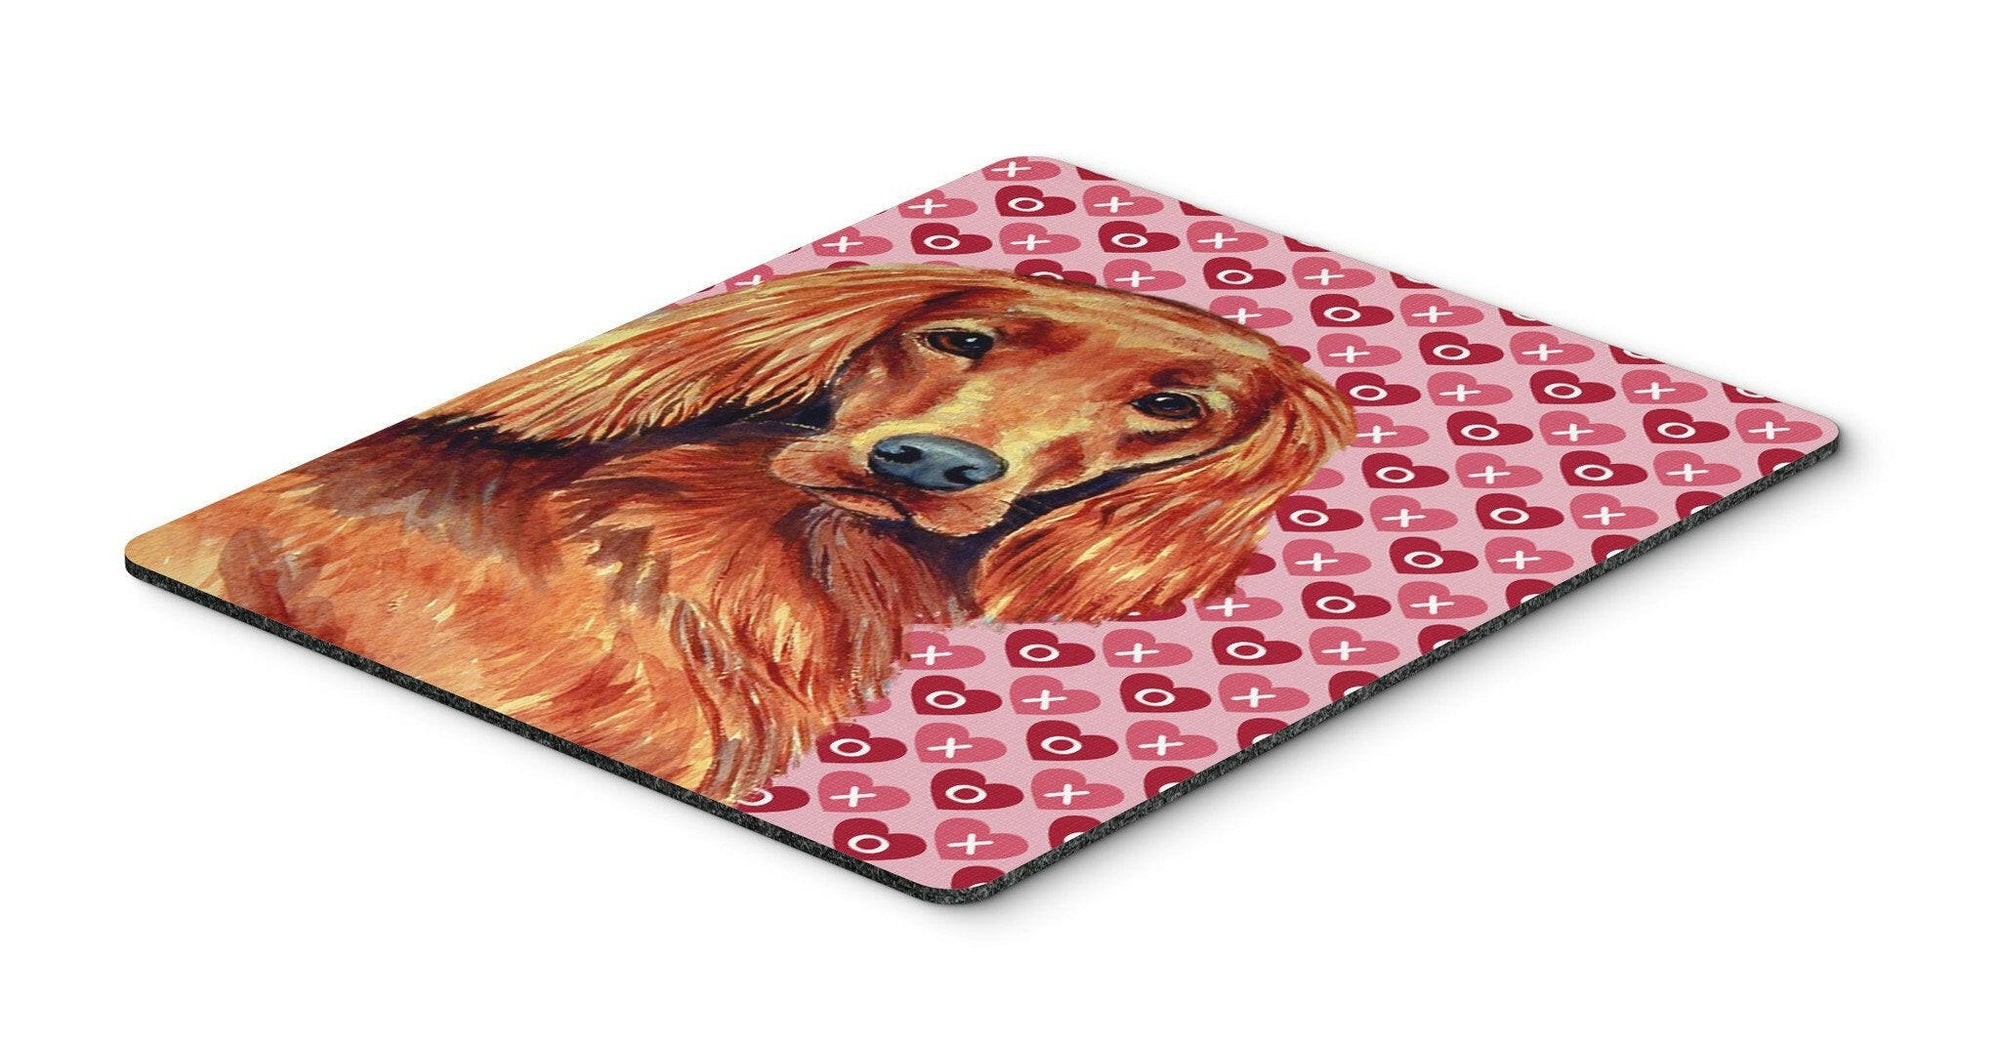 Irish Setter Hearts Love and Valentine's Day Mouse Pad, Hot Pad or Trivet by Caroline's Treasures